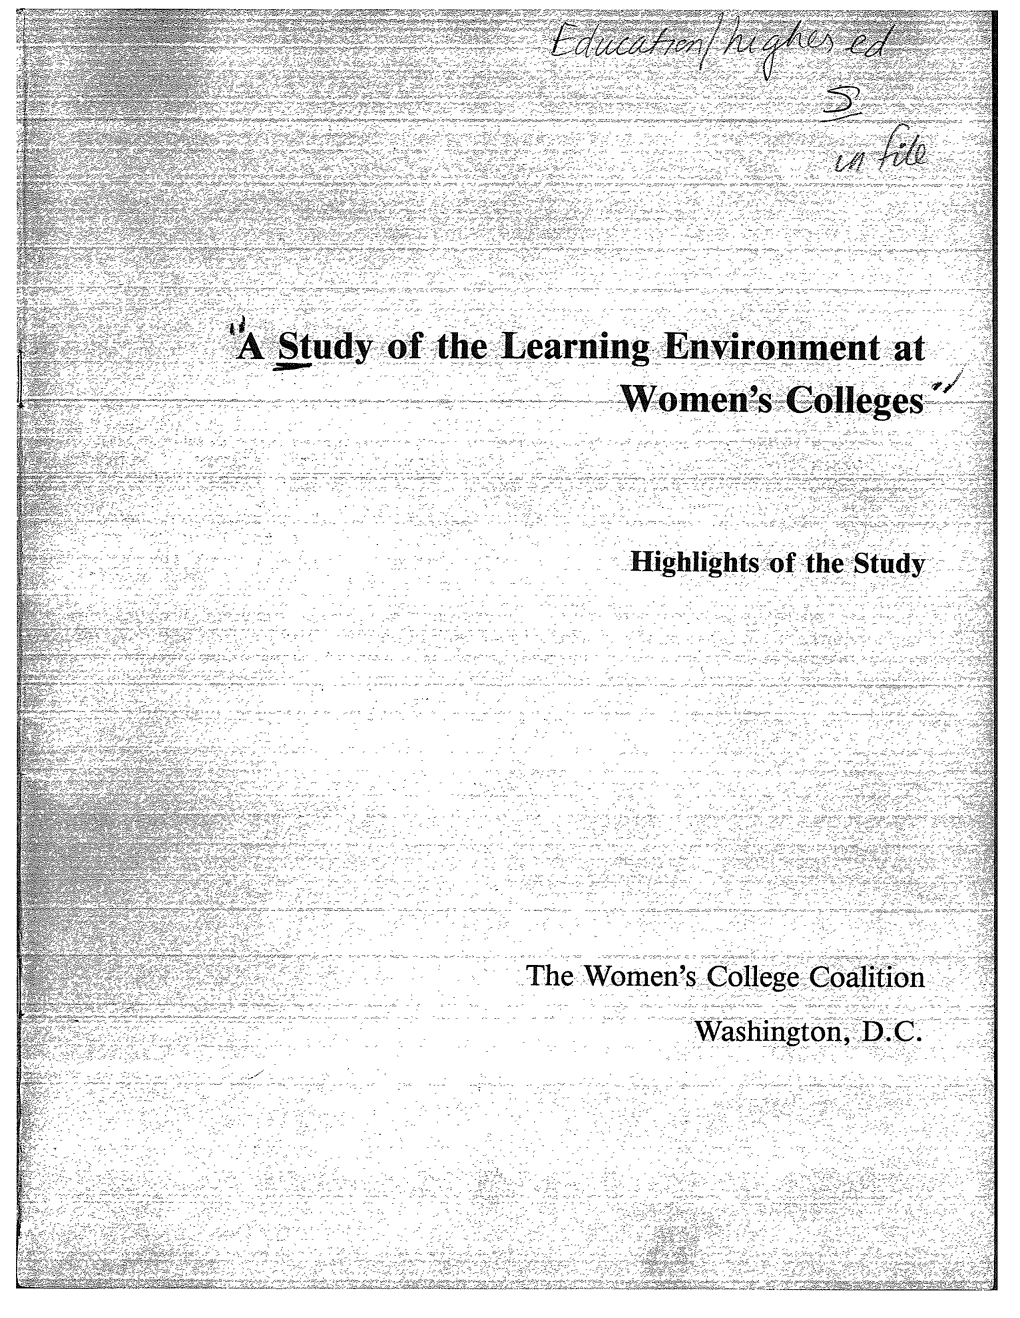 Study of the Learning Environment at Women's Colleges